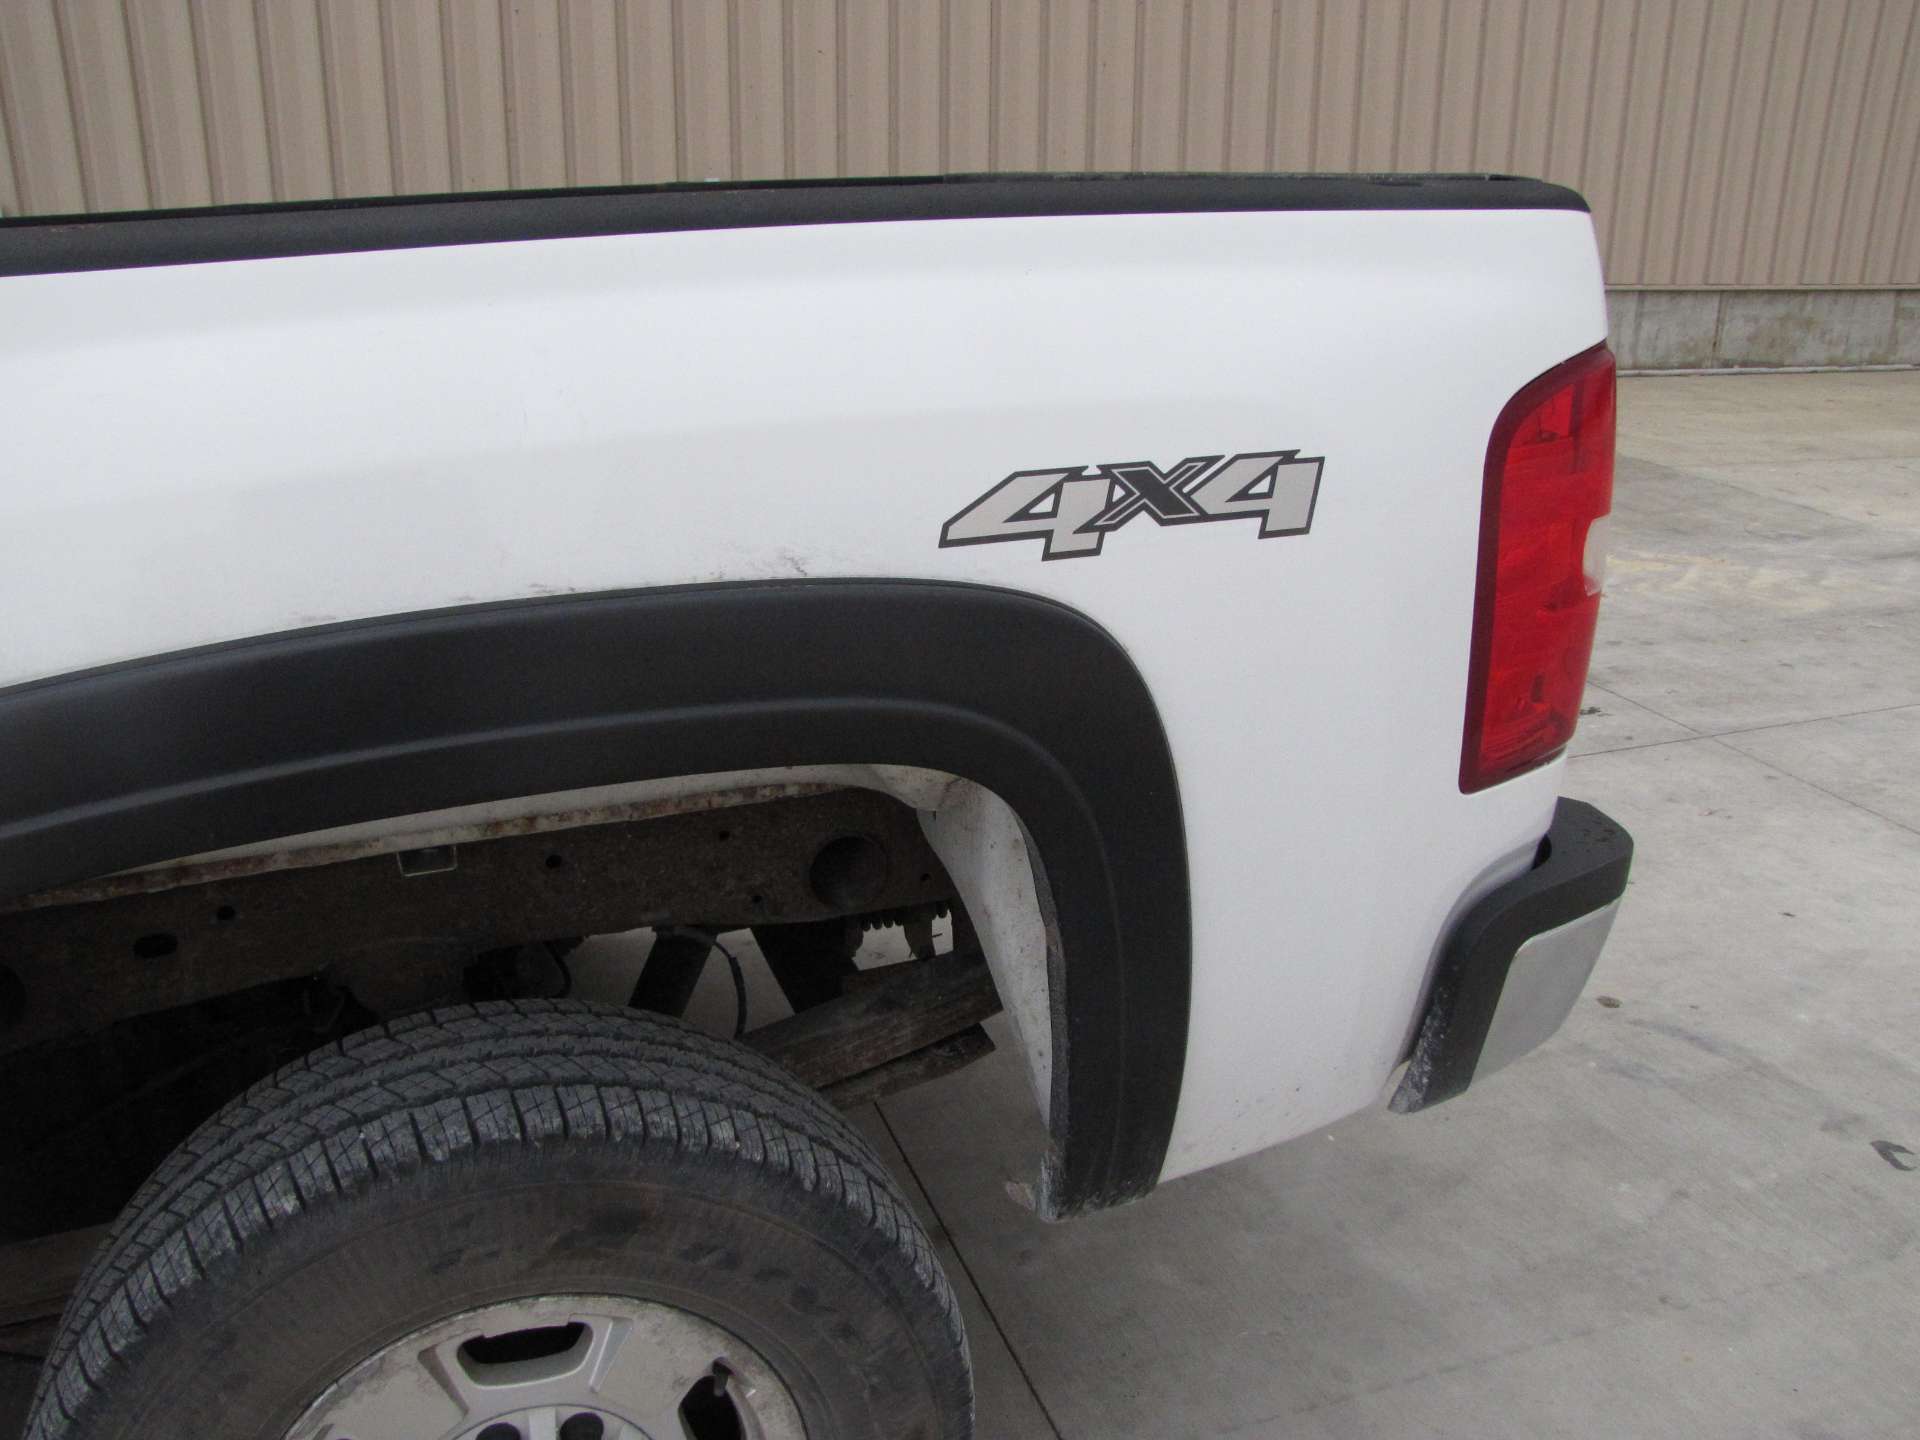 2012 Chevy 2500 HD pickup truck - Image 25 of 57